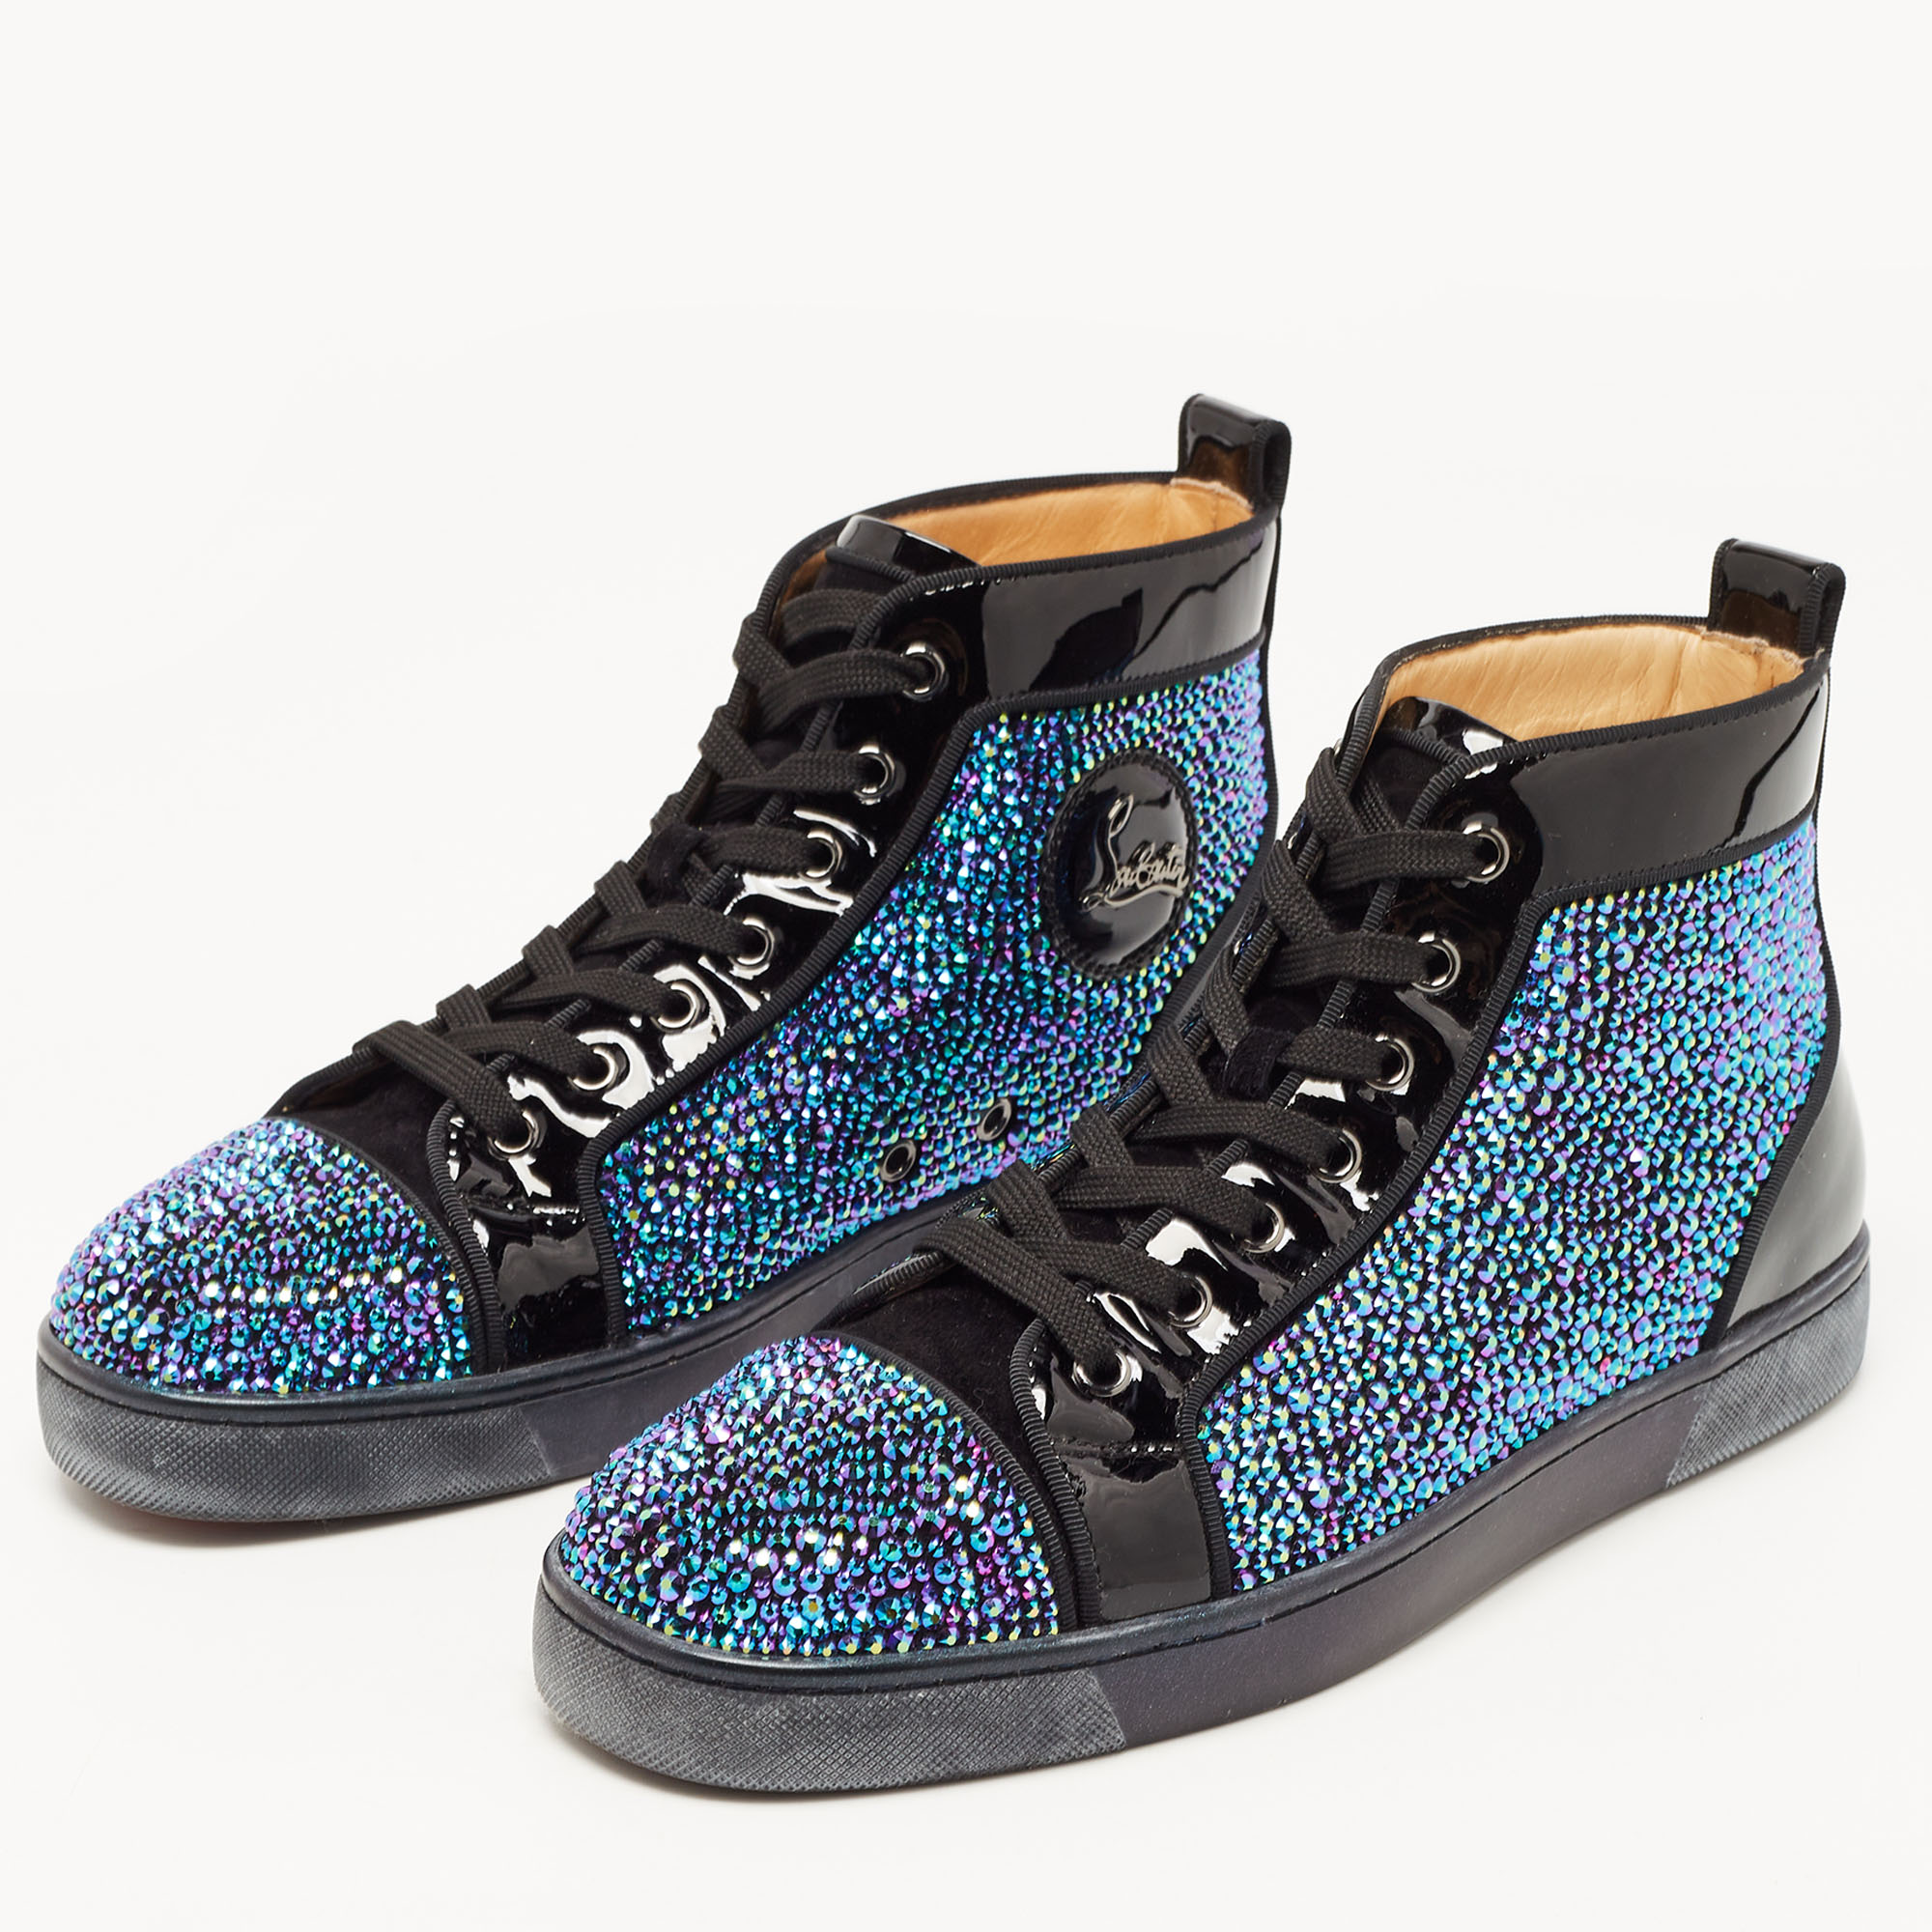 

Christian Louboutin Black Patent Leather and Suede Embellished Louis High-Top Sneakers Size